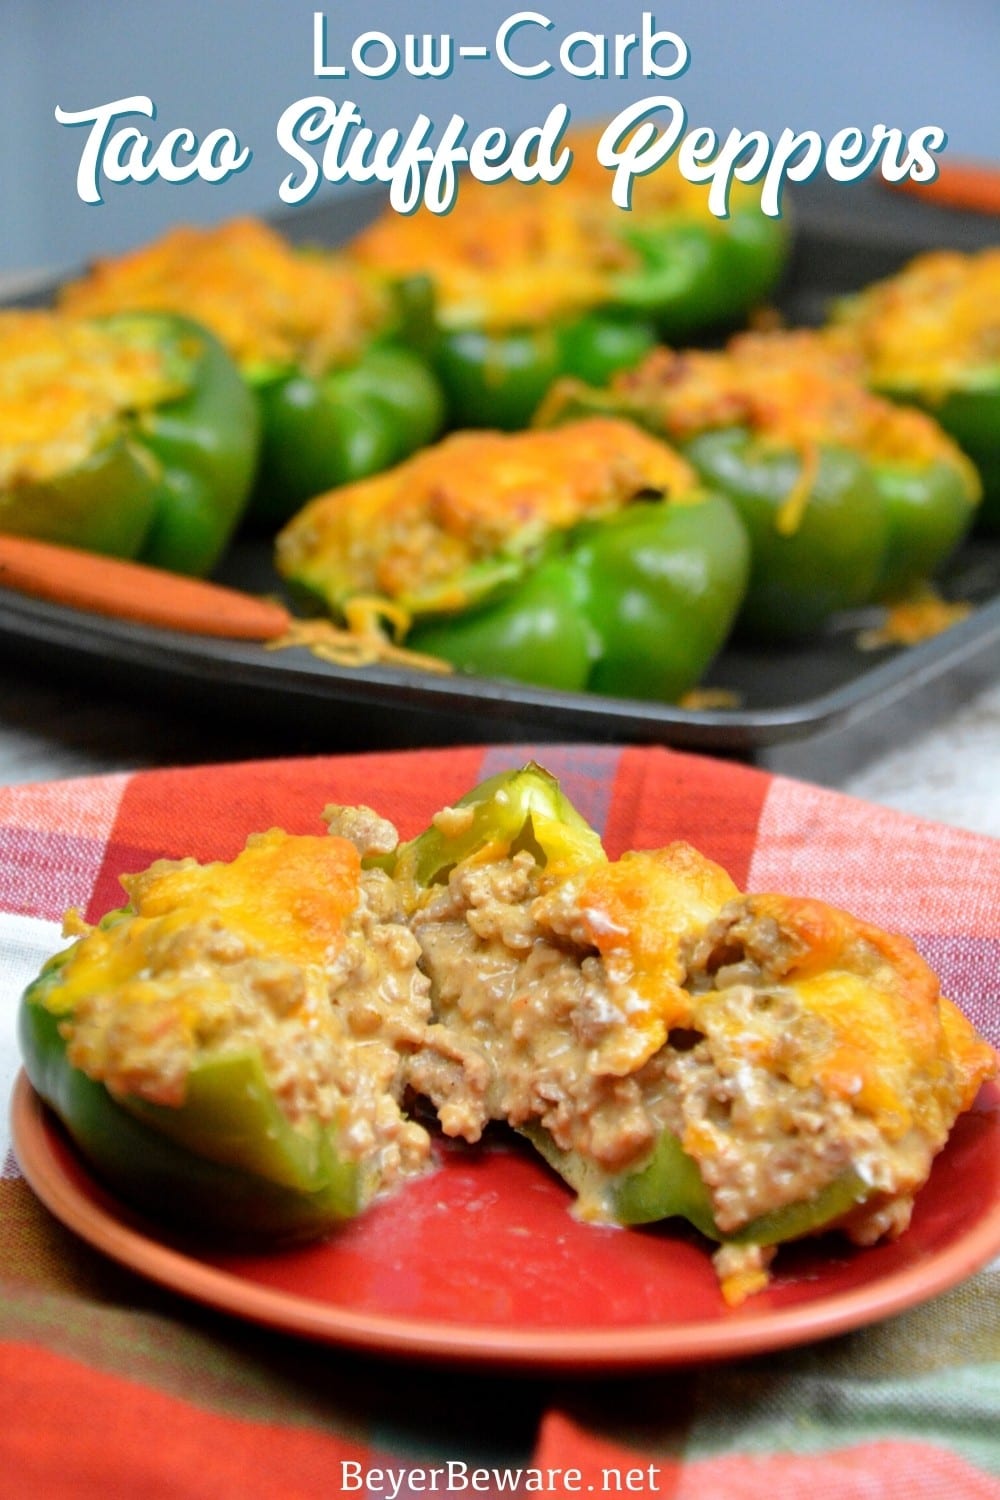 Low-Carb Taco Stuffed Peppers are a 9 net carb low carb stuffed pepper recipe with a queso sausage filling that is full of your favorite Mexican flavors and baked to form a cheesy crust over the peppers and sausage filling for a keto taco like dinner.